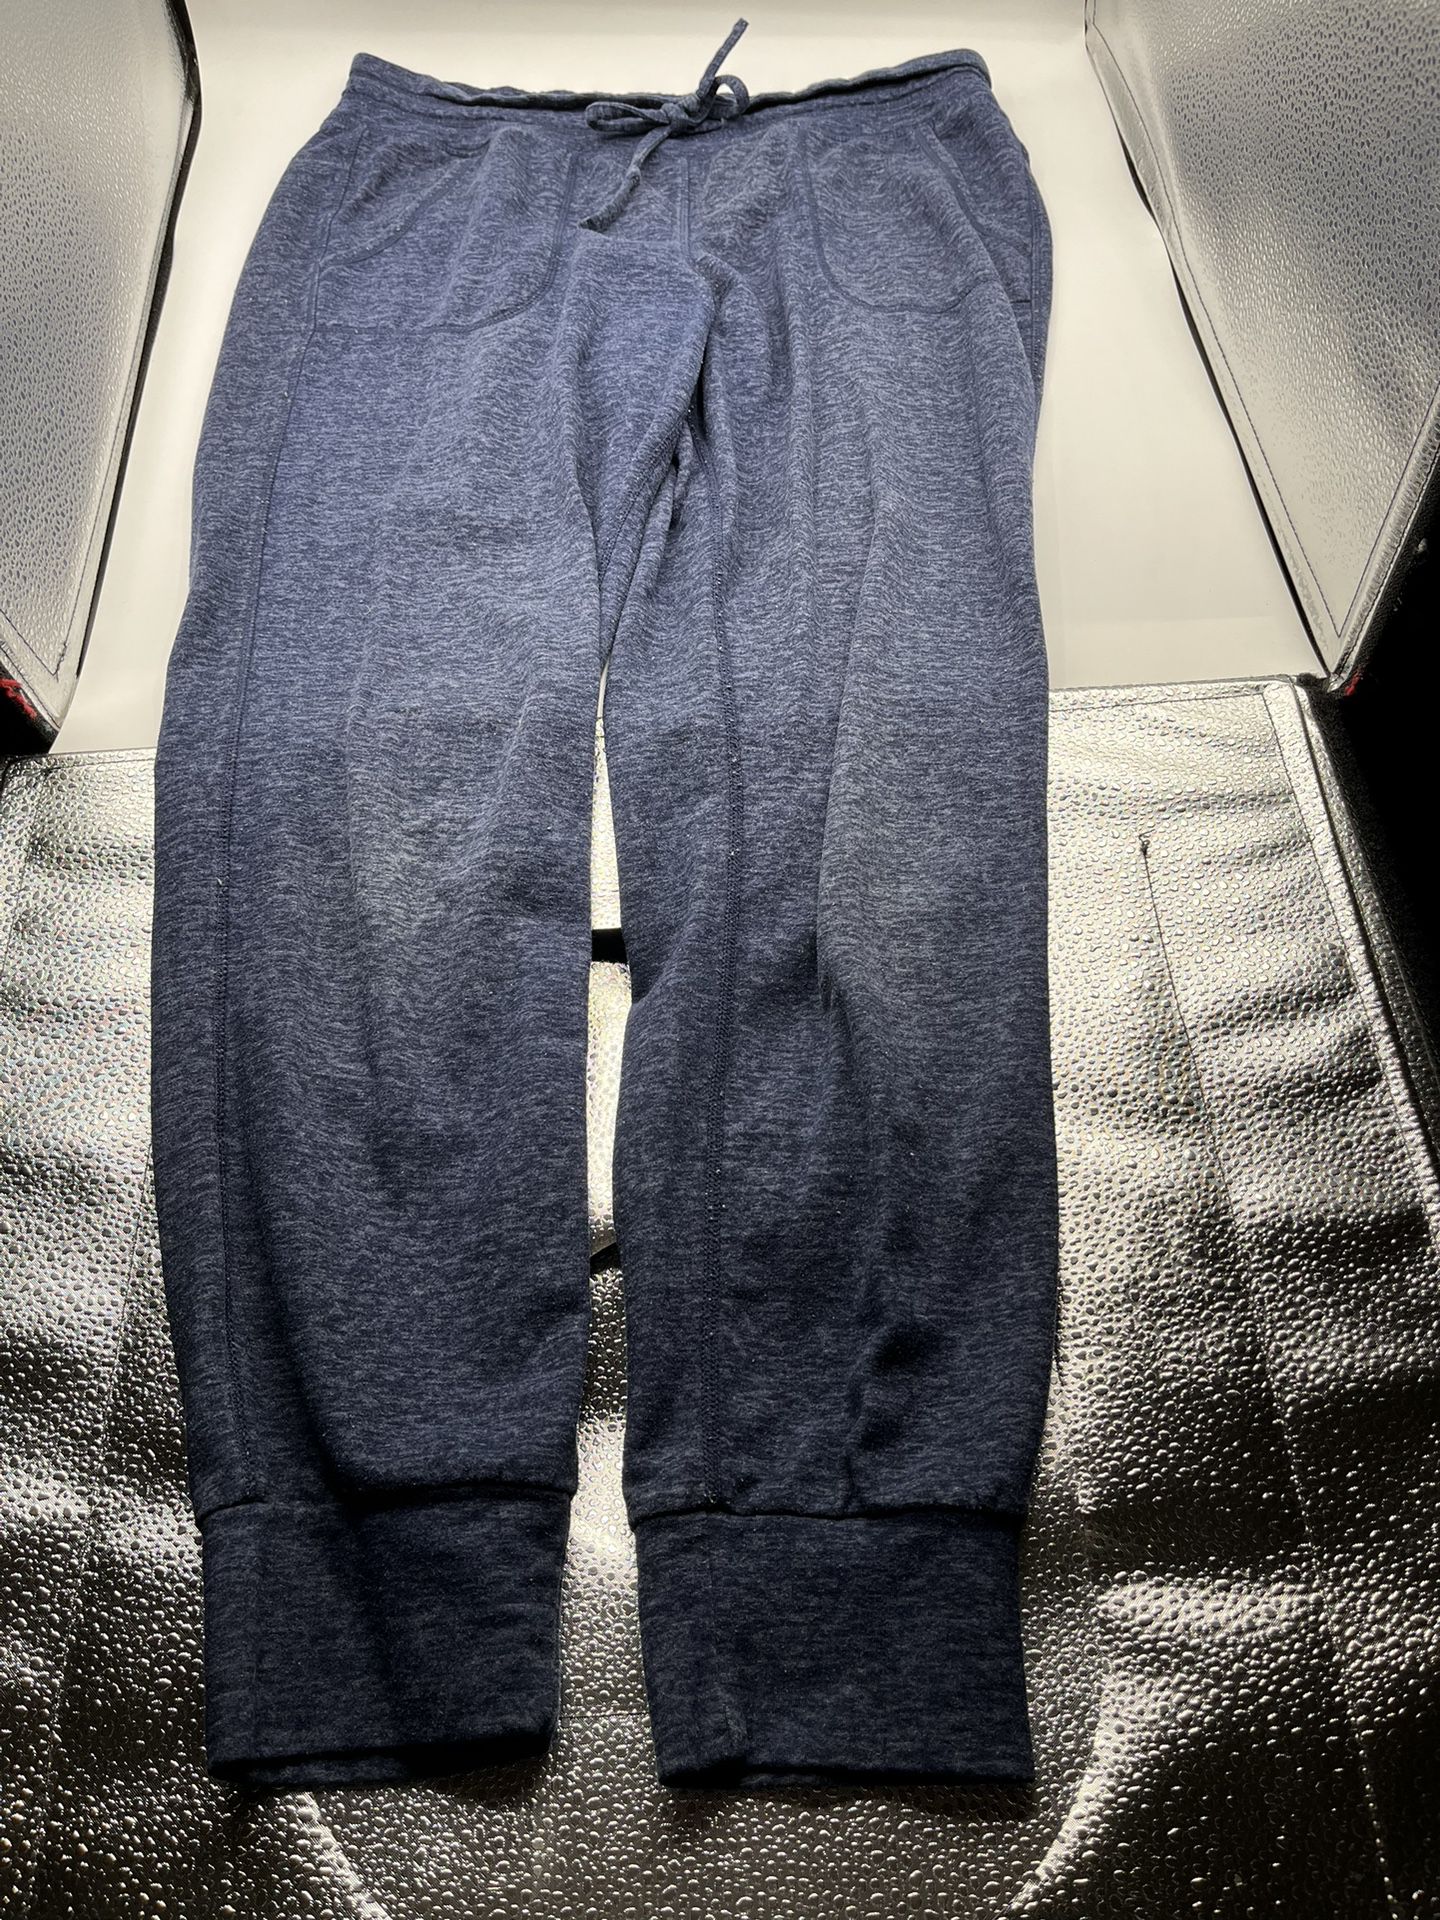 Blue Sweatpants /joggers With Front Pockets Size Medium 